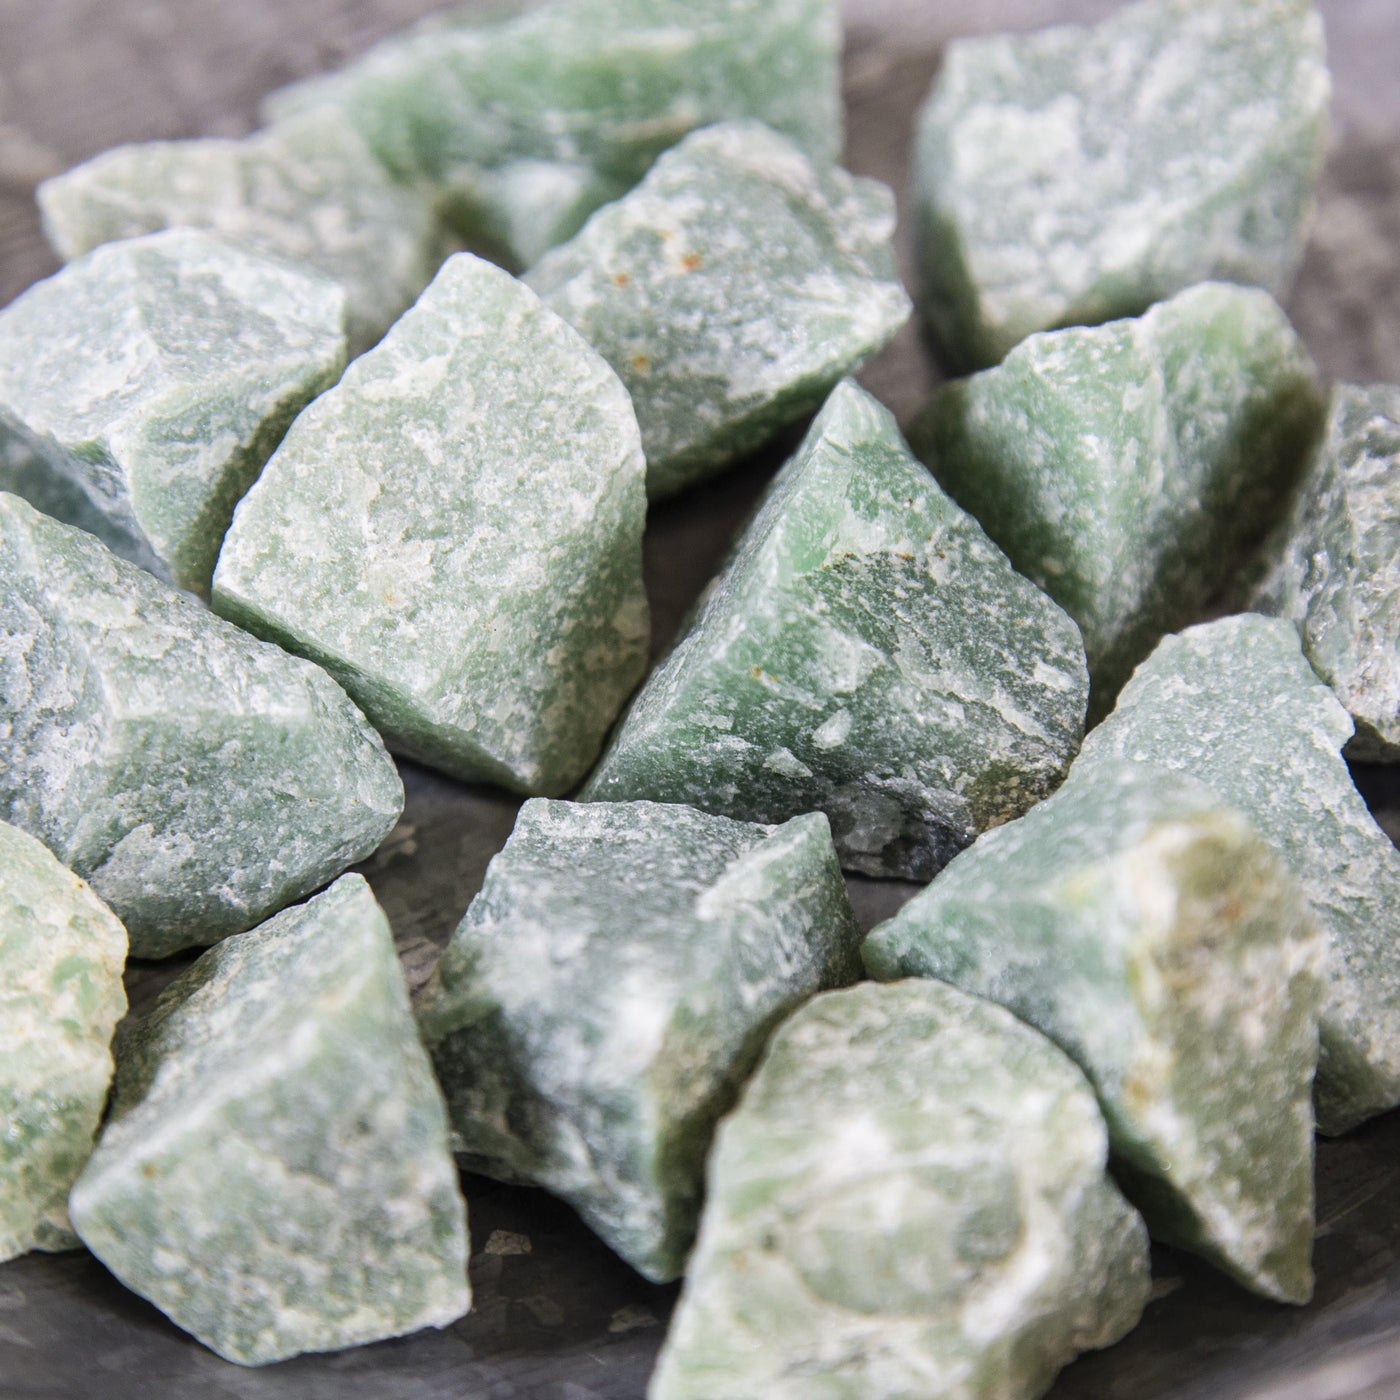 up close of the green quartz pieces to view various colors textures shapes sizes